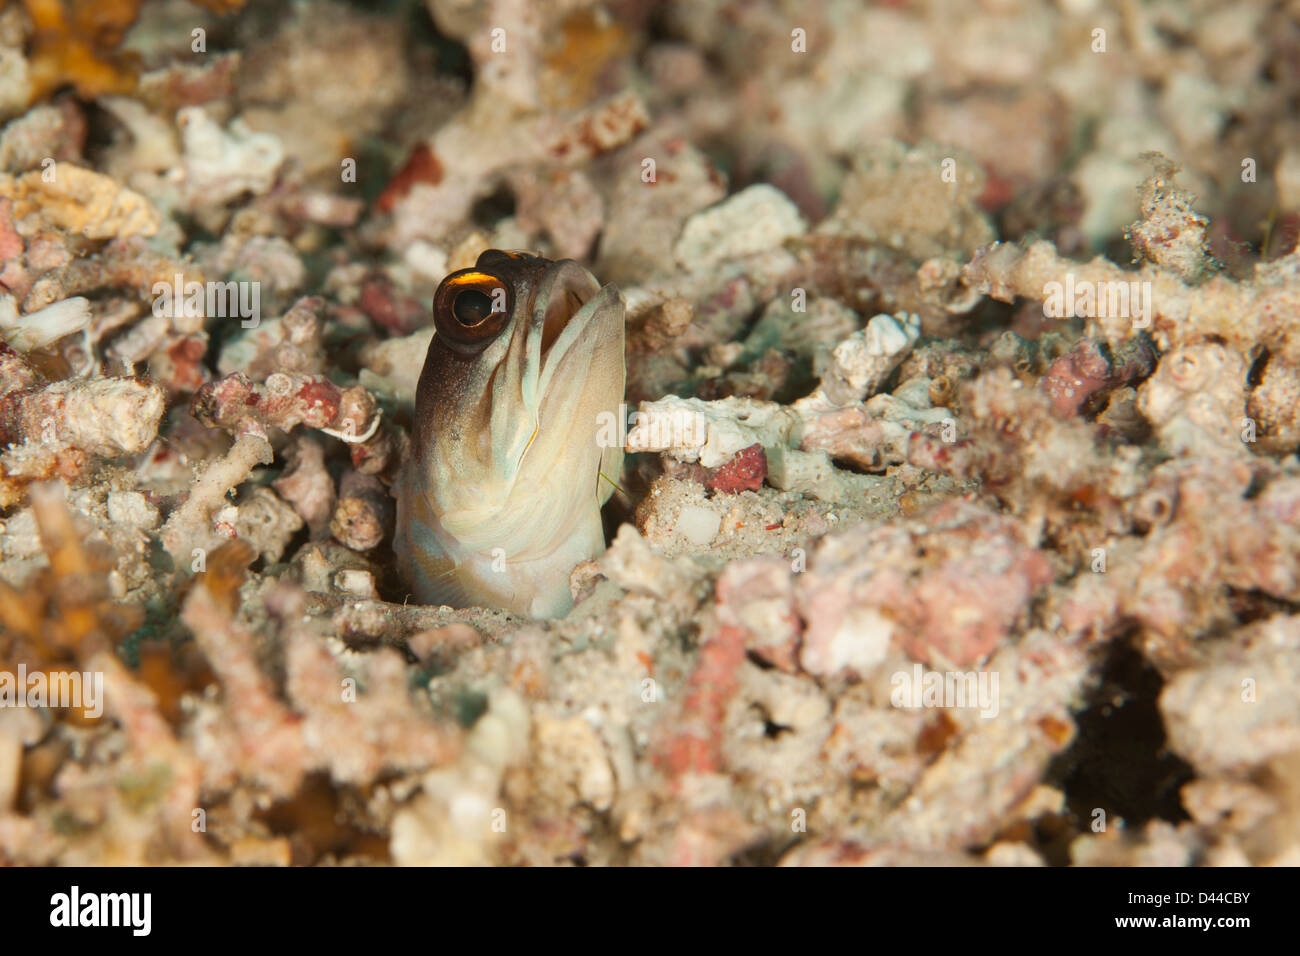 Yellowbarred Jawfish (Opistognathus sp.) peering out of the coral rubble on a tropical coral reef in Bali, Indonesia. Stock Photo